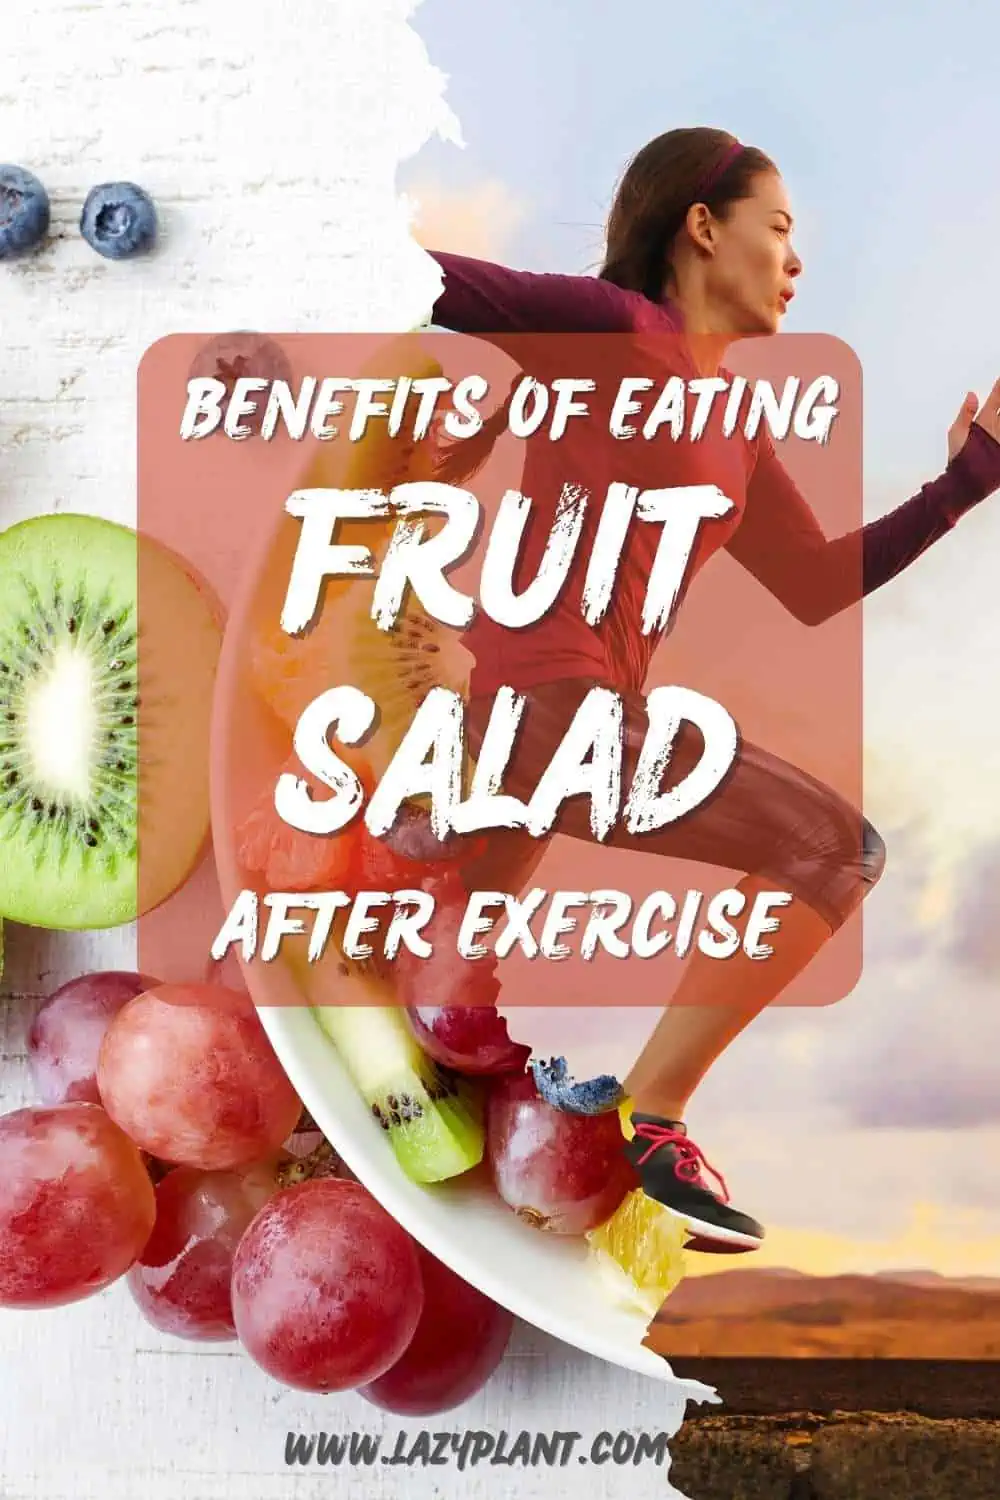 Benefits of eating a fruit salad after strenuous exercise for athletes!